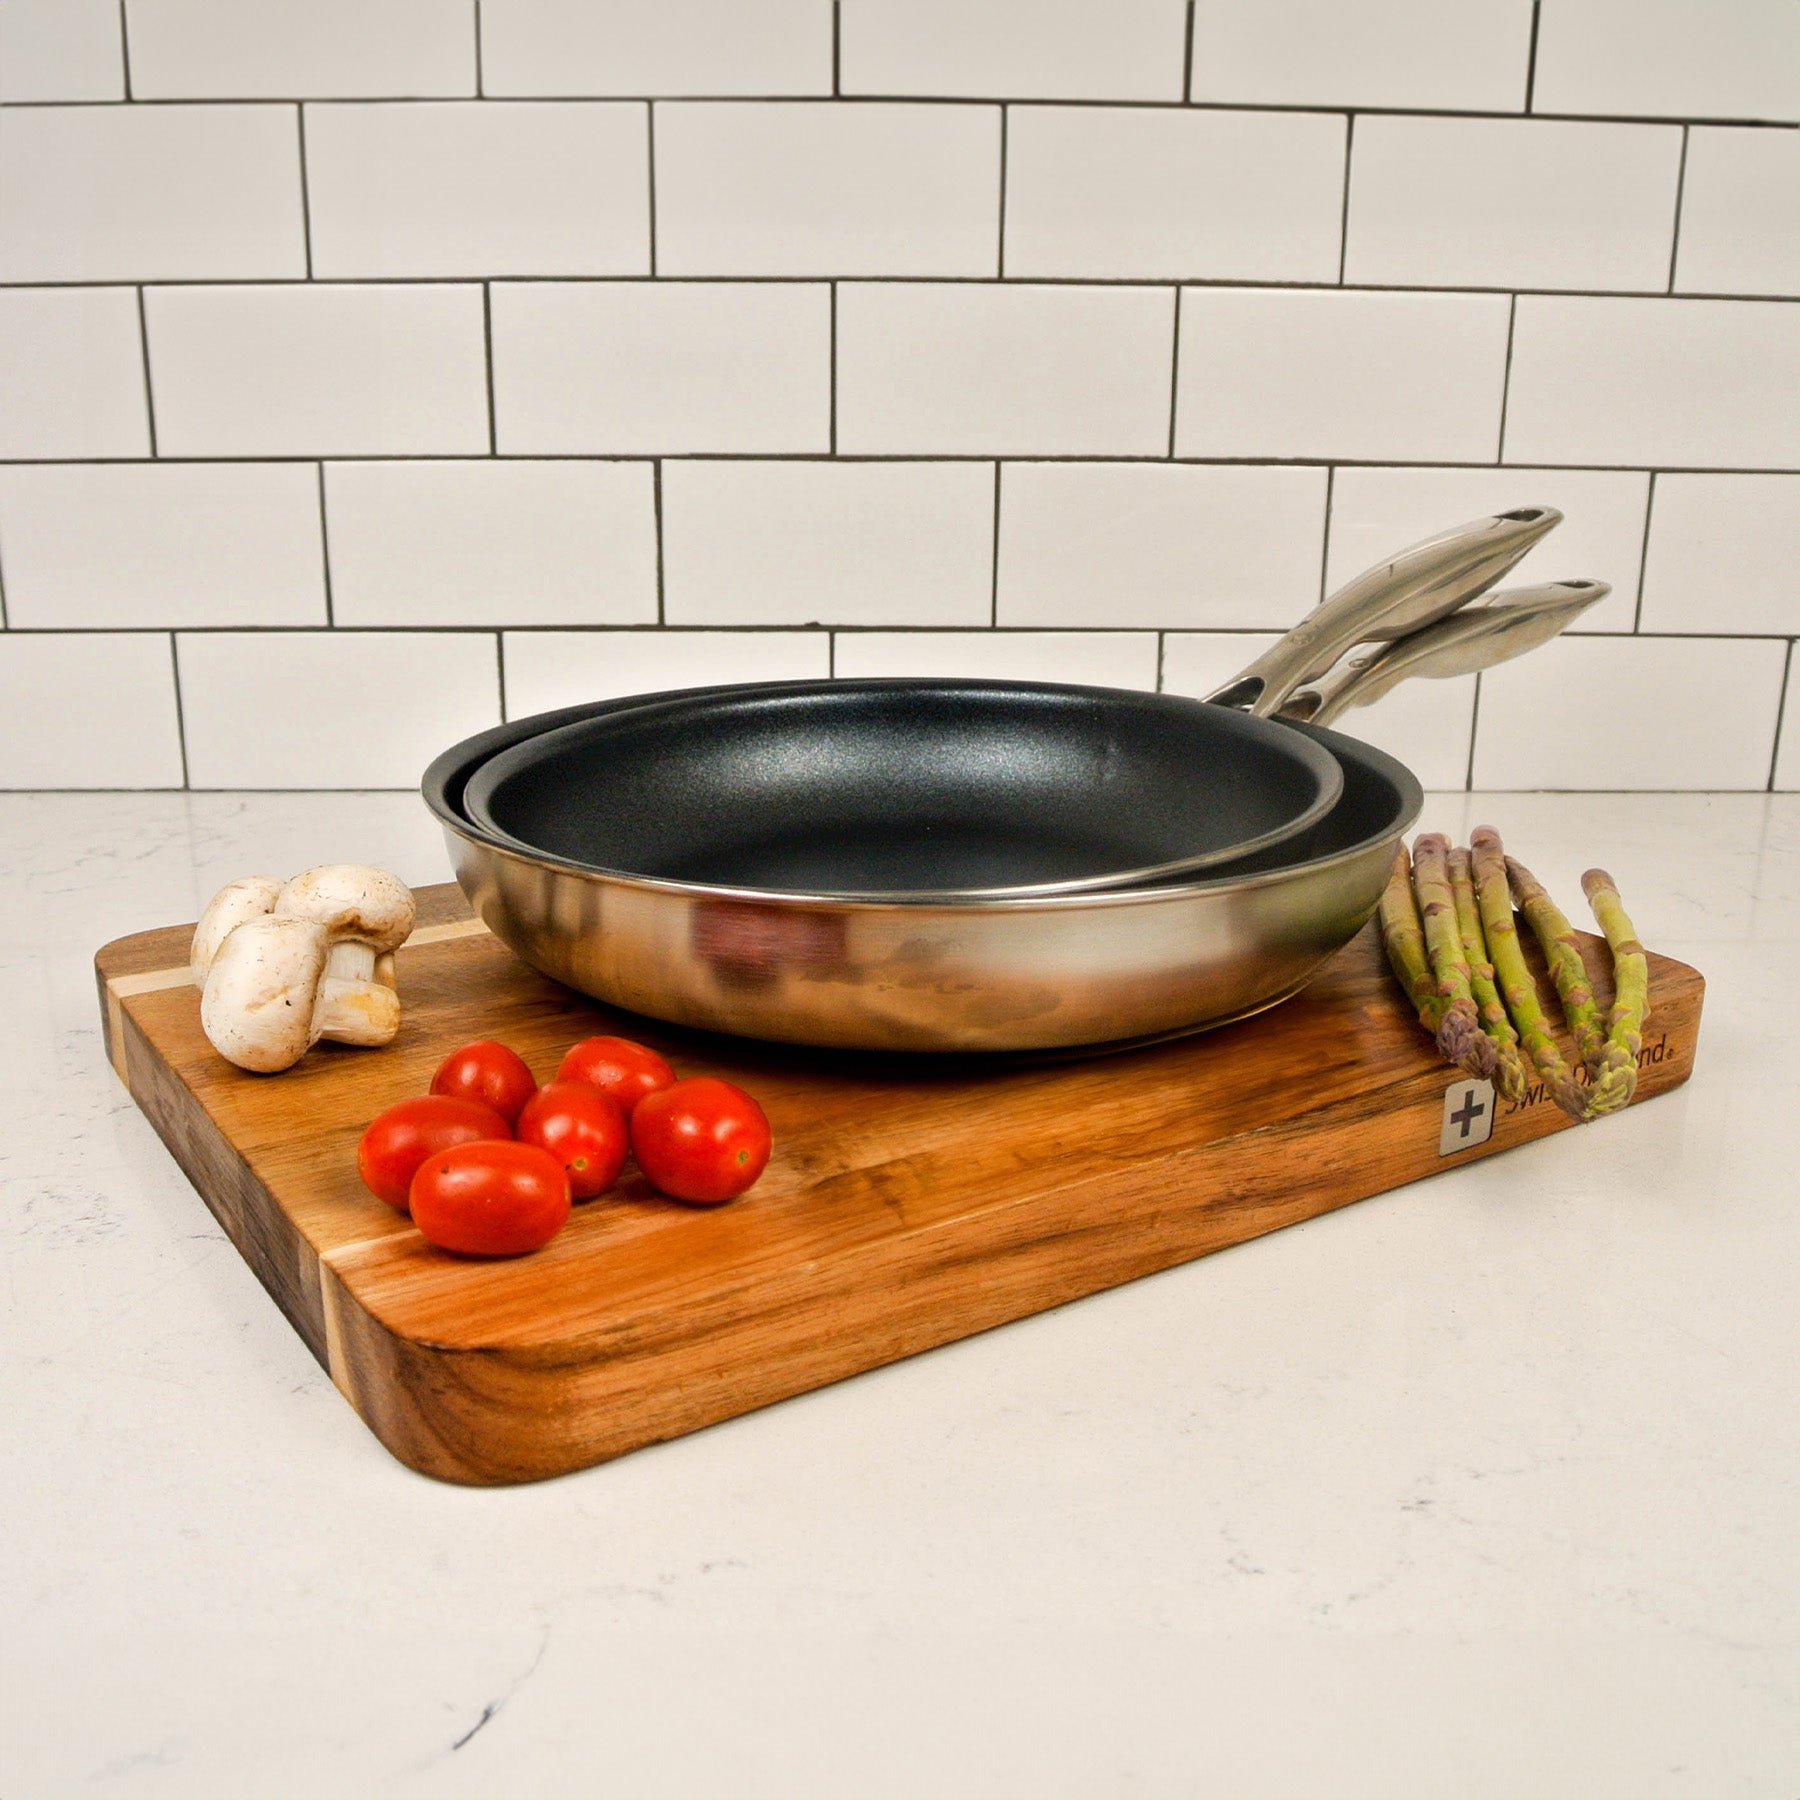 Nonstick Clad Fry Pan 2-Piece Set - Induction in use on a cutting board on kitchen counter